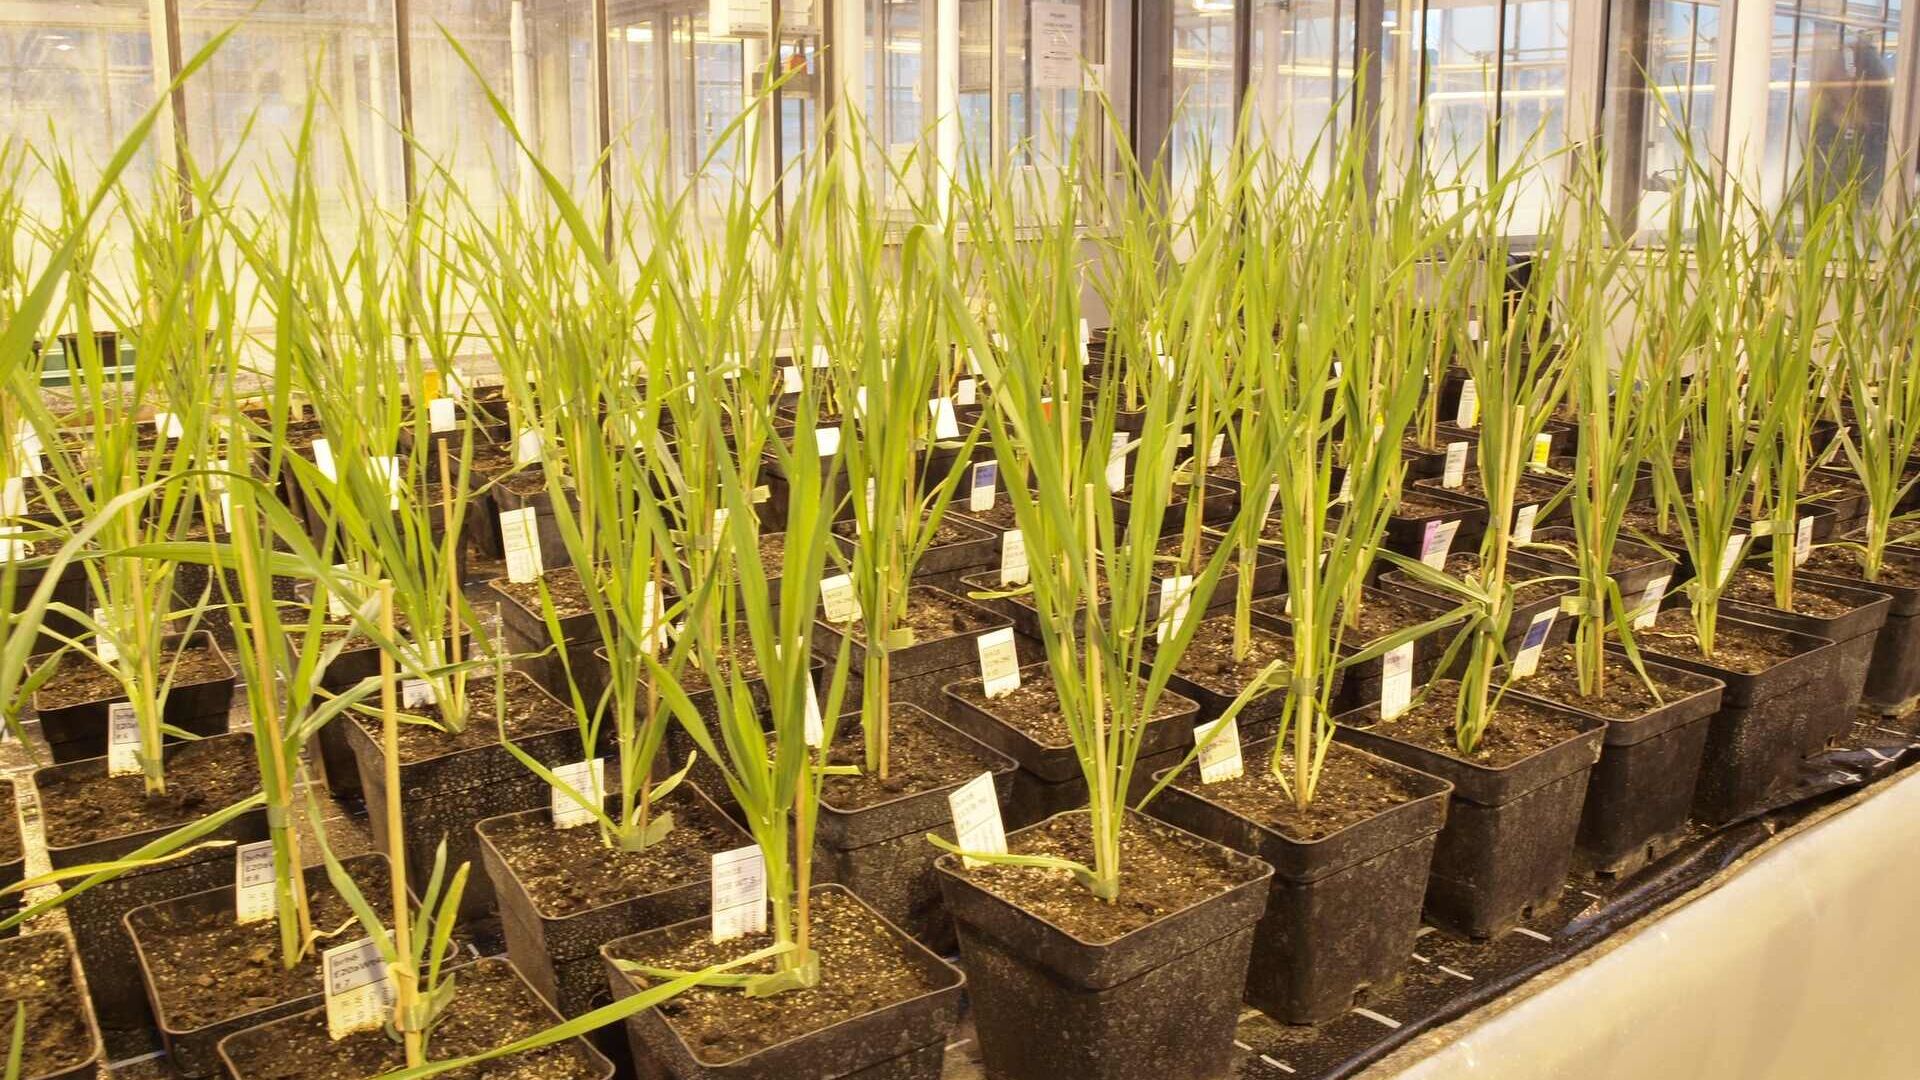 Genetically modified barley: Agroscope will acquire knowledge for over three years on the behavior of plants in open fields at the Reckenholz site (Zurich) with authorization from the Federal Office for the Environment